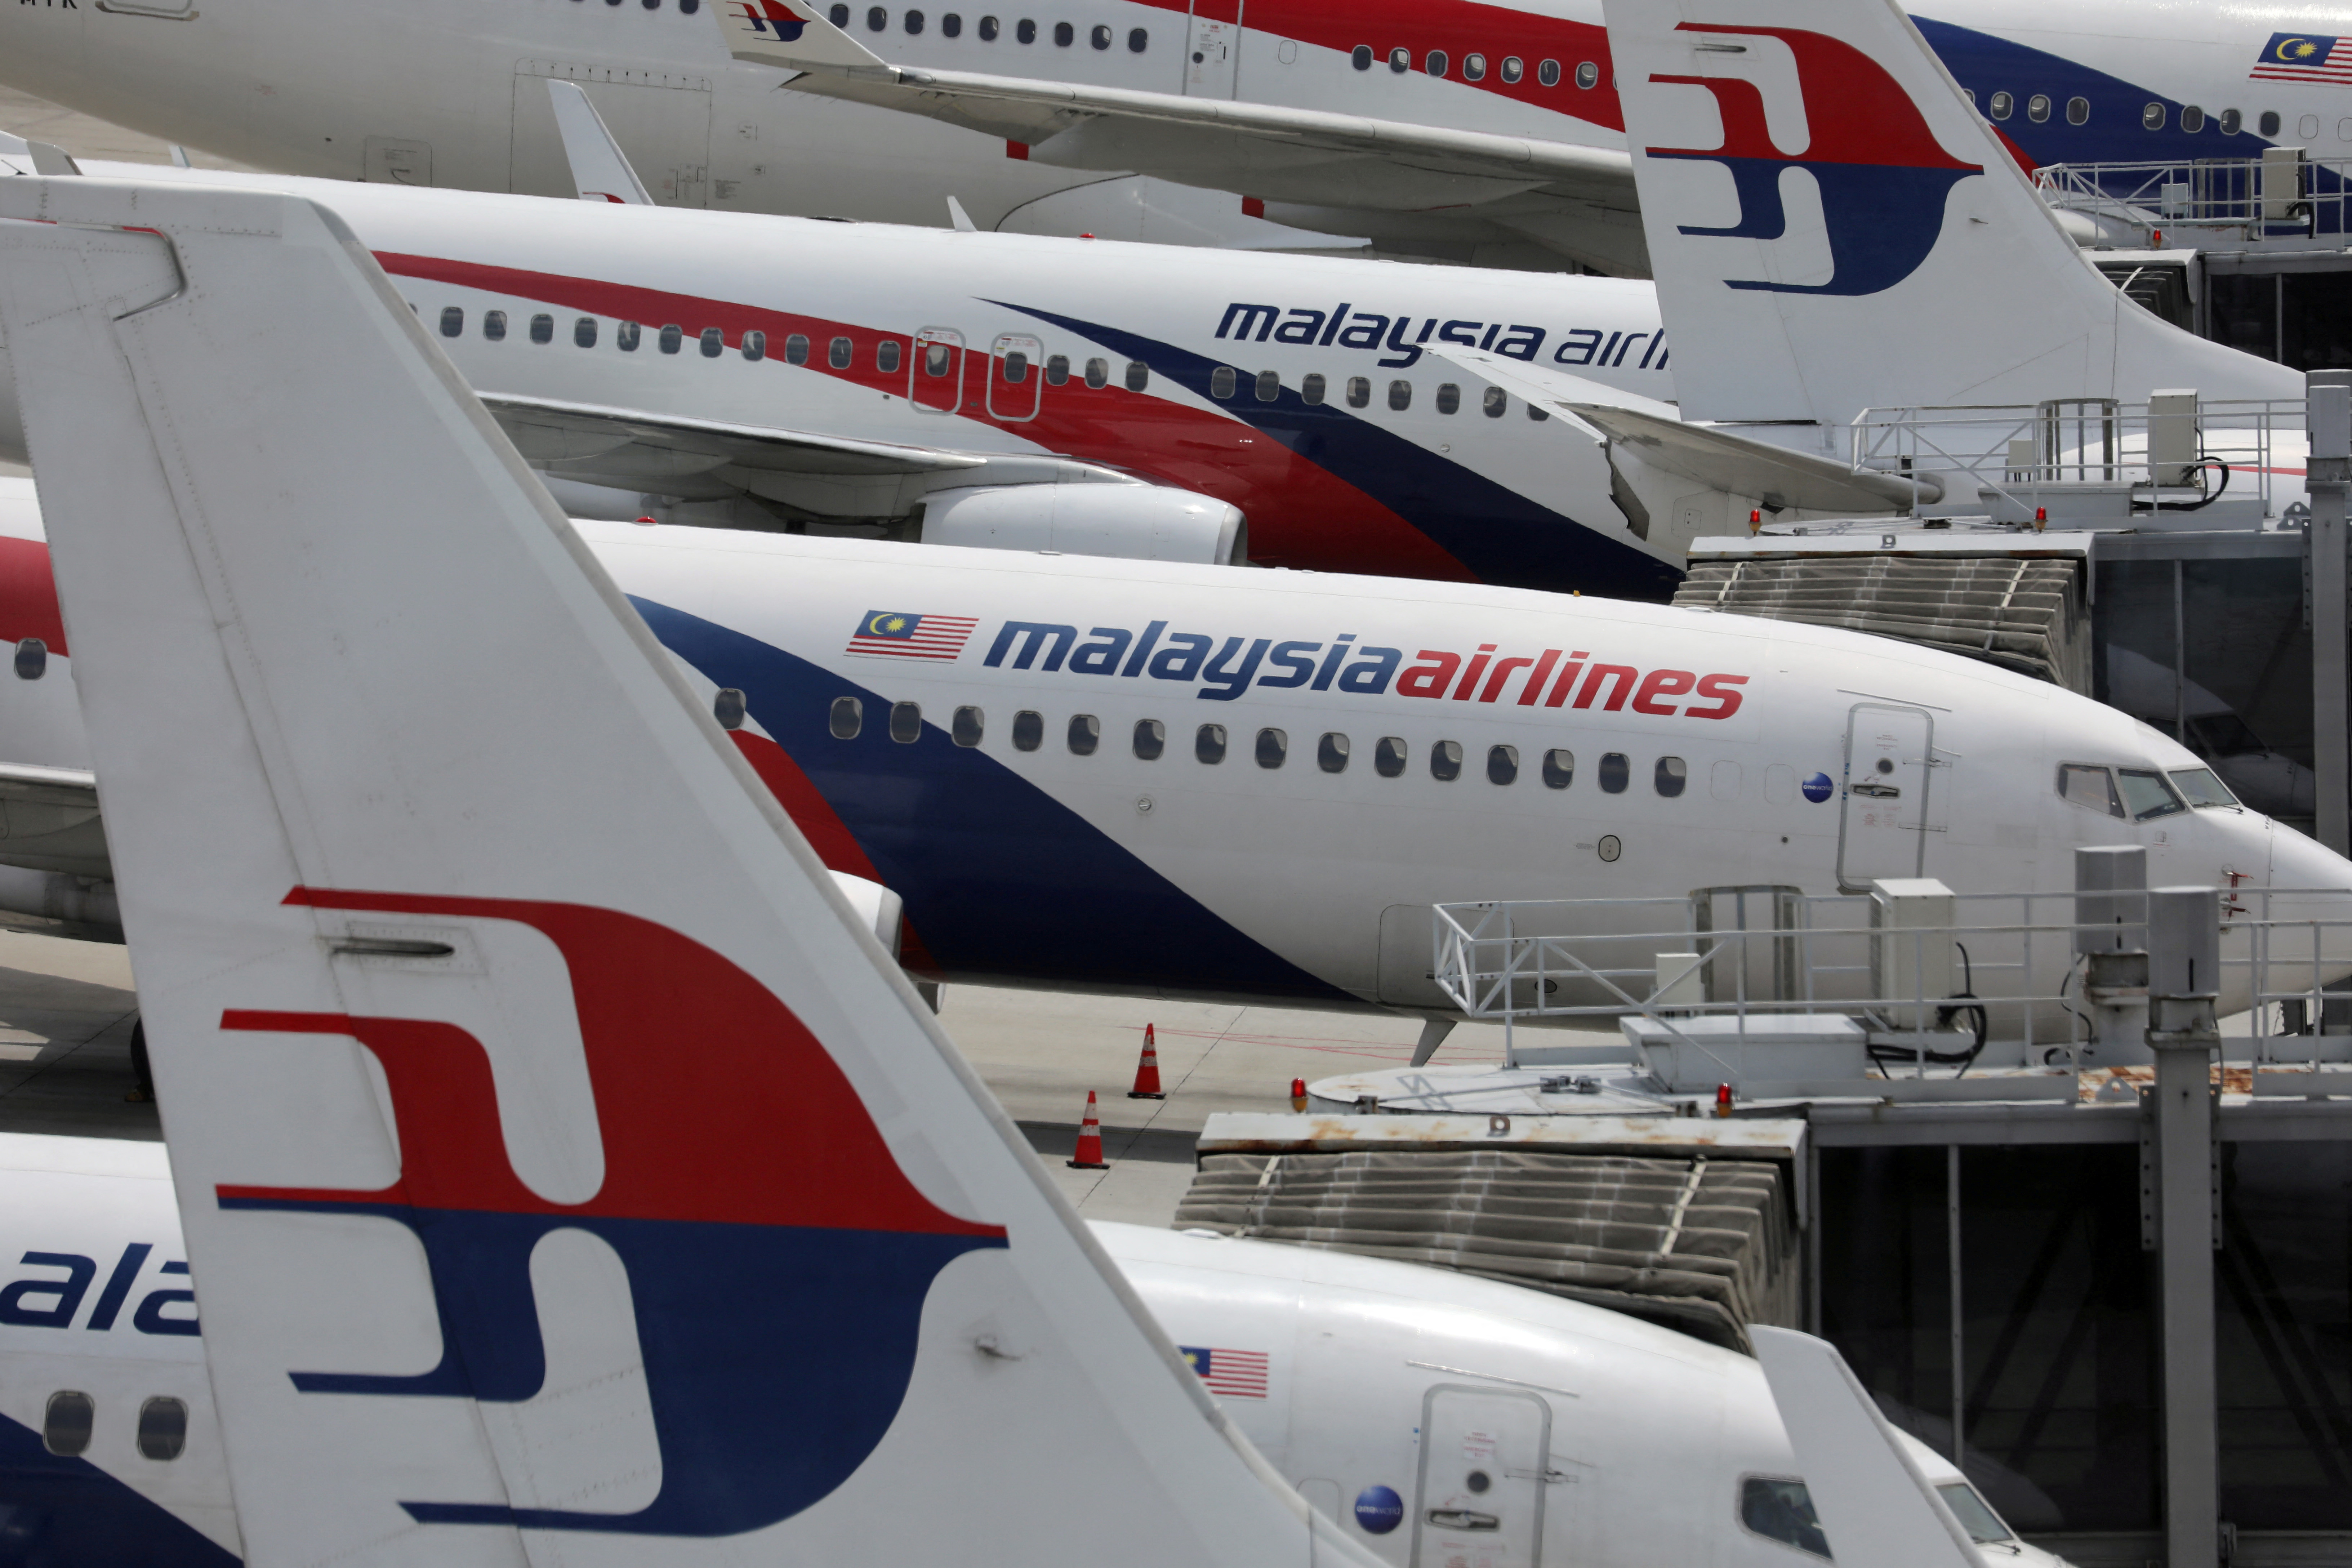 Malaysia Airlines planes parked at Kuala Lumpur International Airport